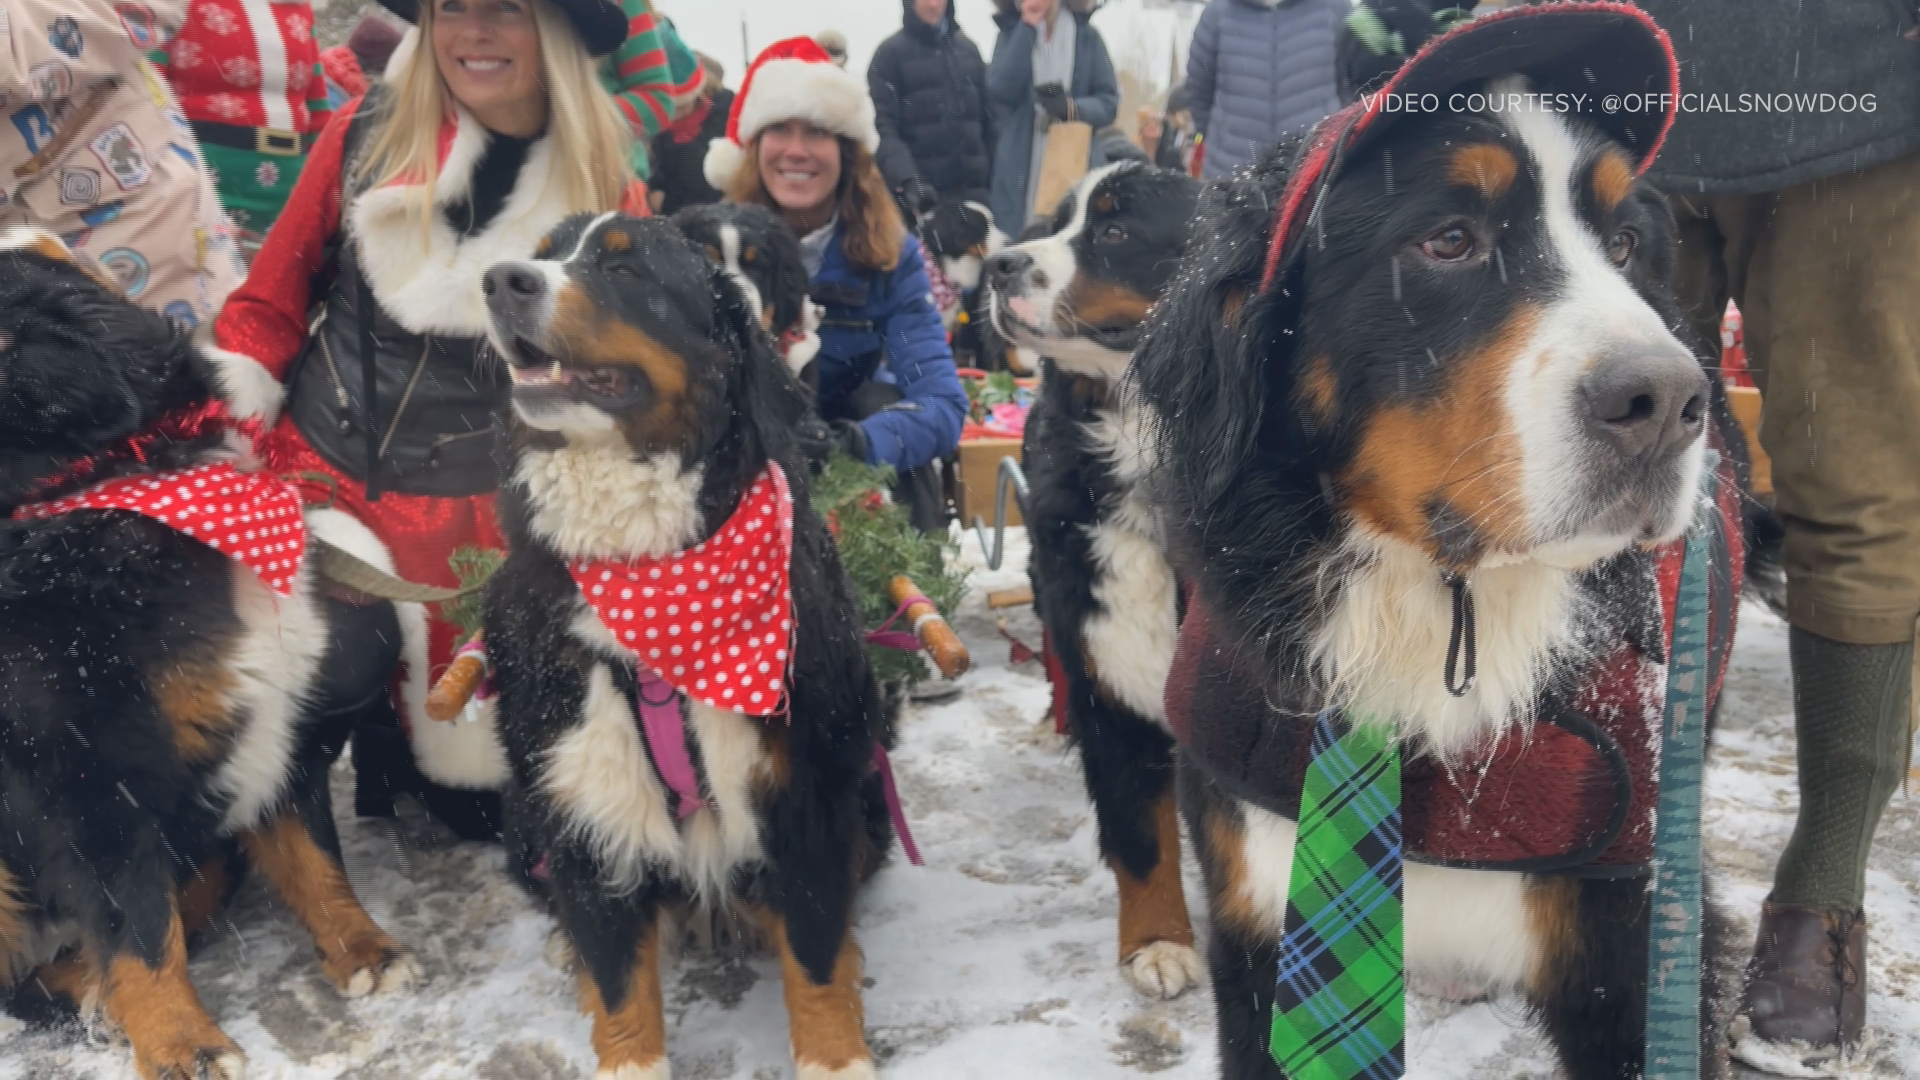 Over 300 Bernese Mountain Dogs took the streets of Breckenridge, Colorado this weekend for the annual Bernese Mountain Dog Parade.